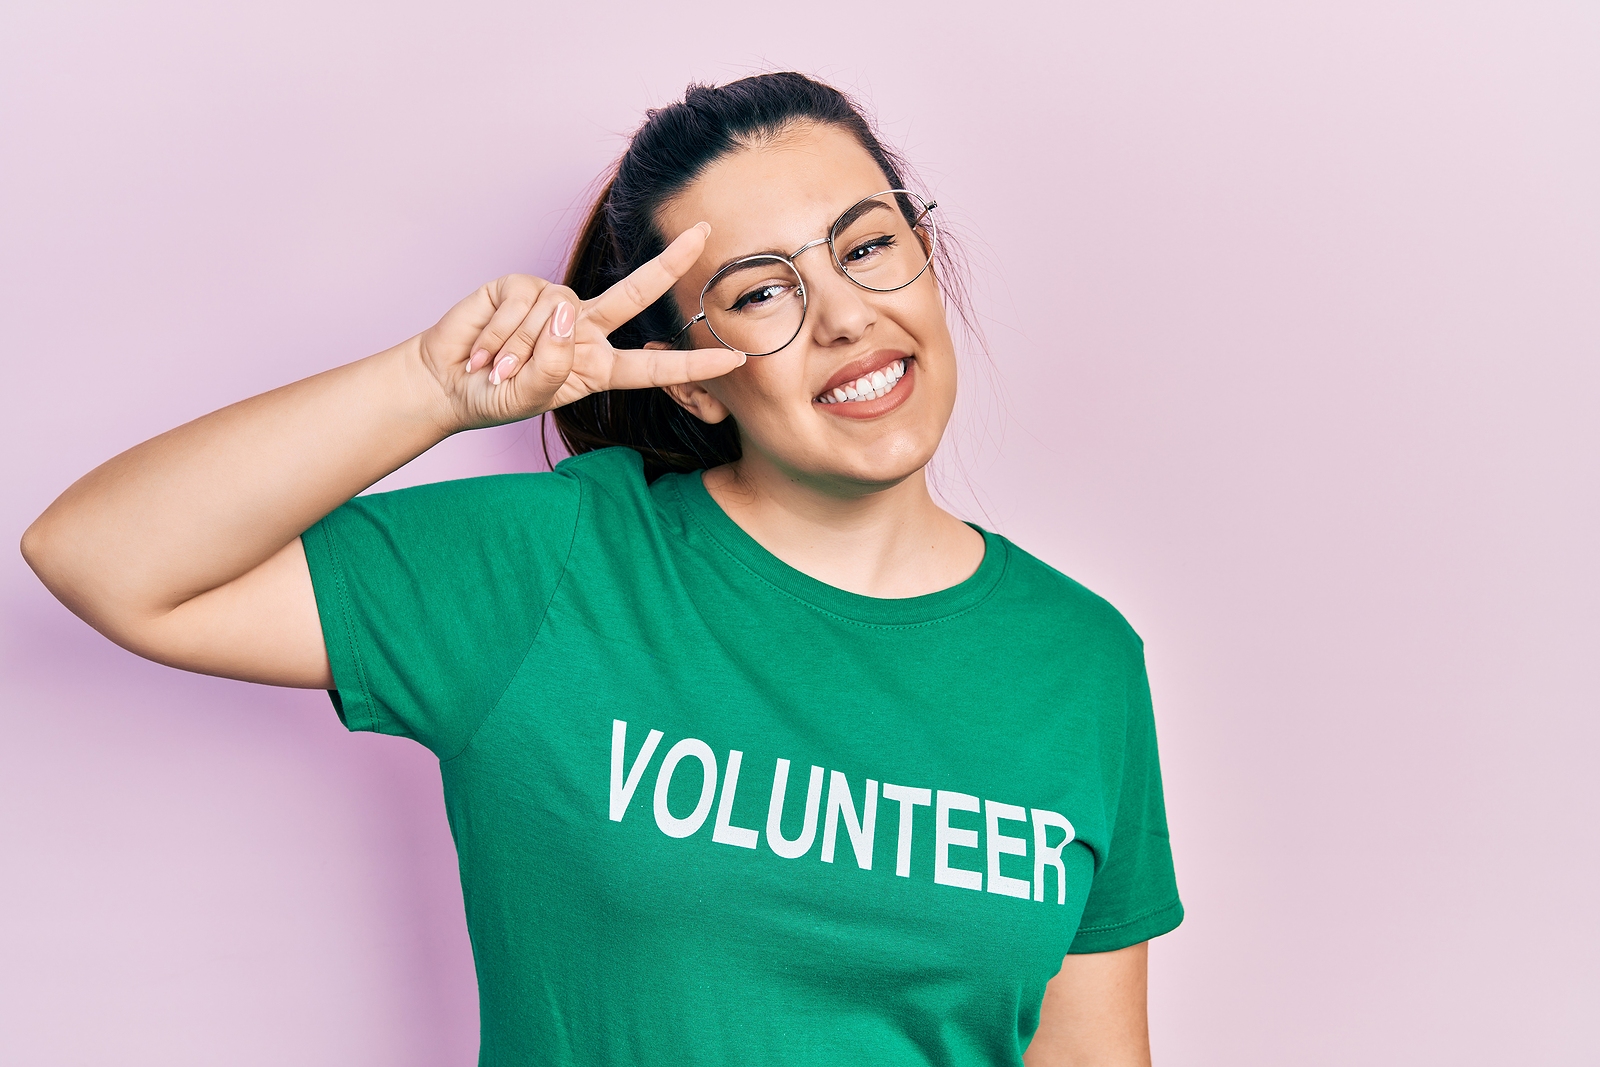 Young hispanic woman wearing volunteer t shirt doing peace symbol with fingers over face, smiling cheerful showing victory.